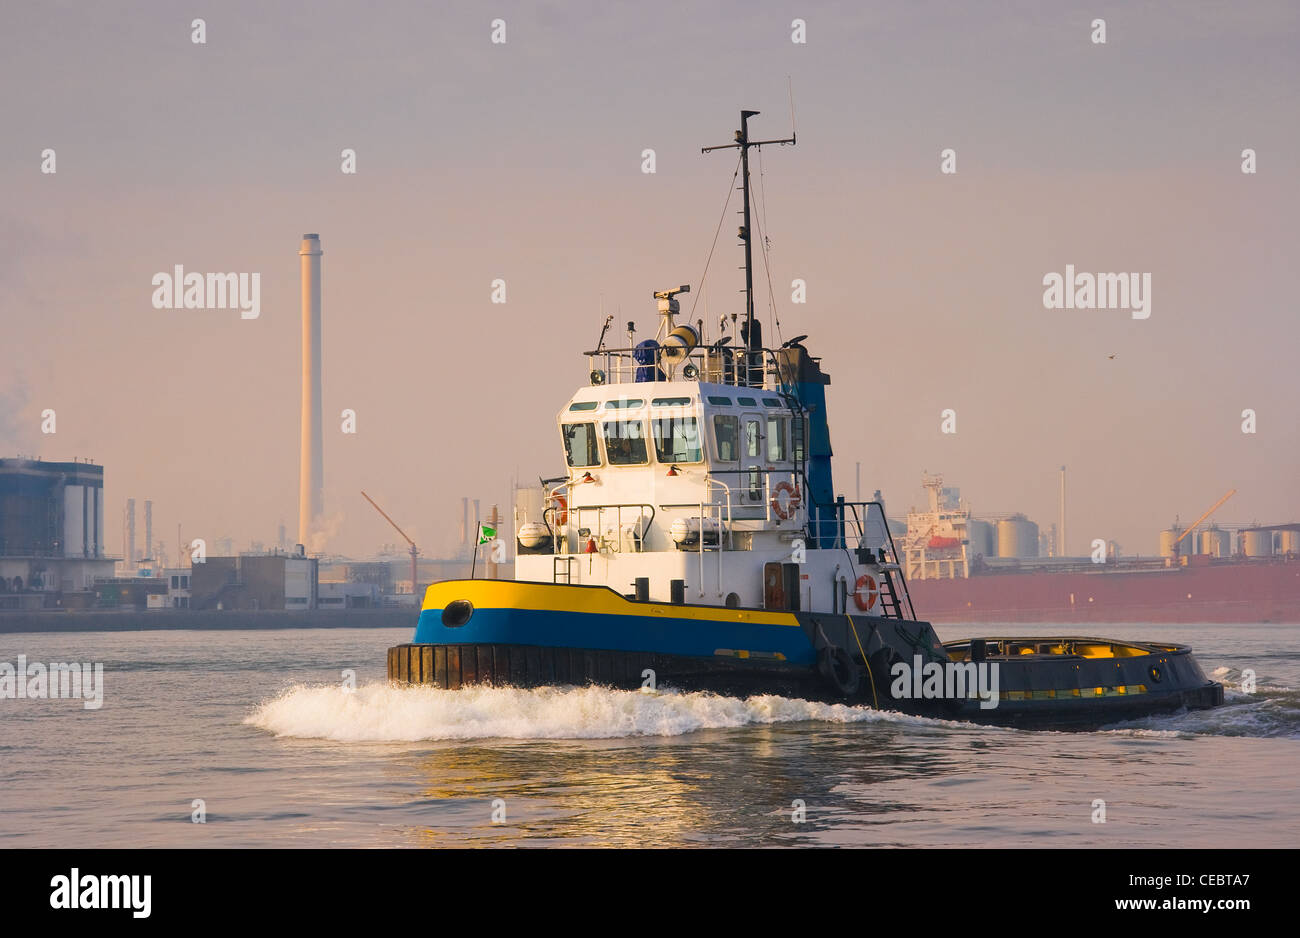 Tug on the river passing by in the sun with industry in background Stock Photo